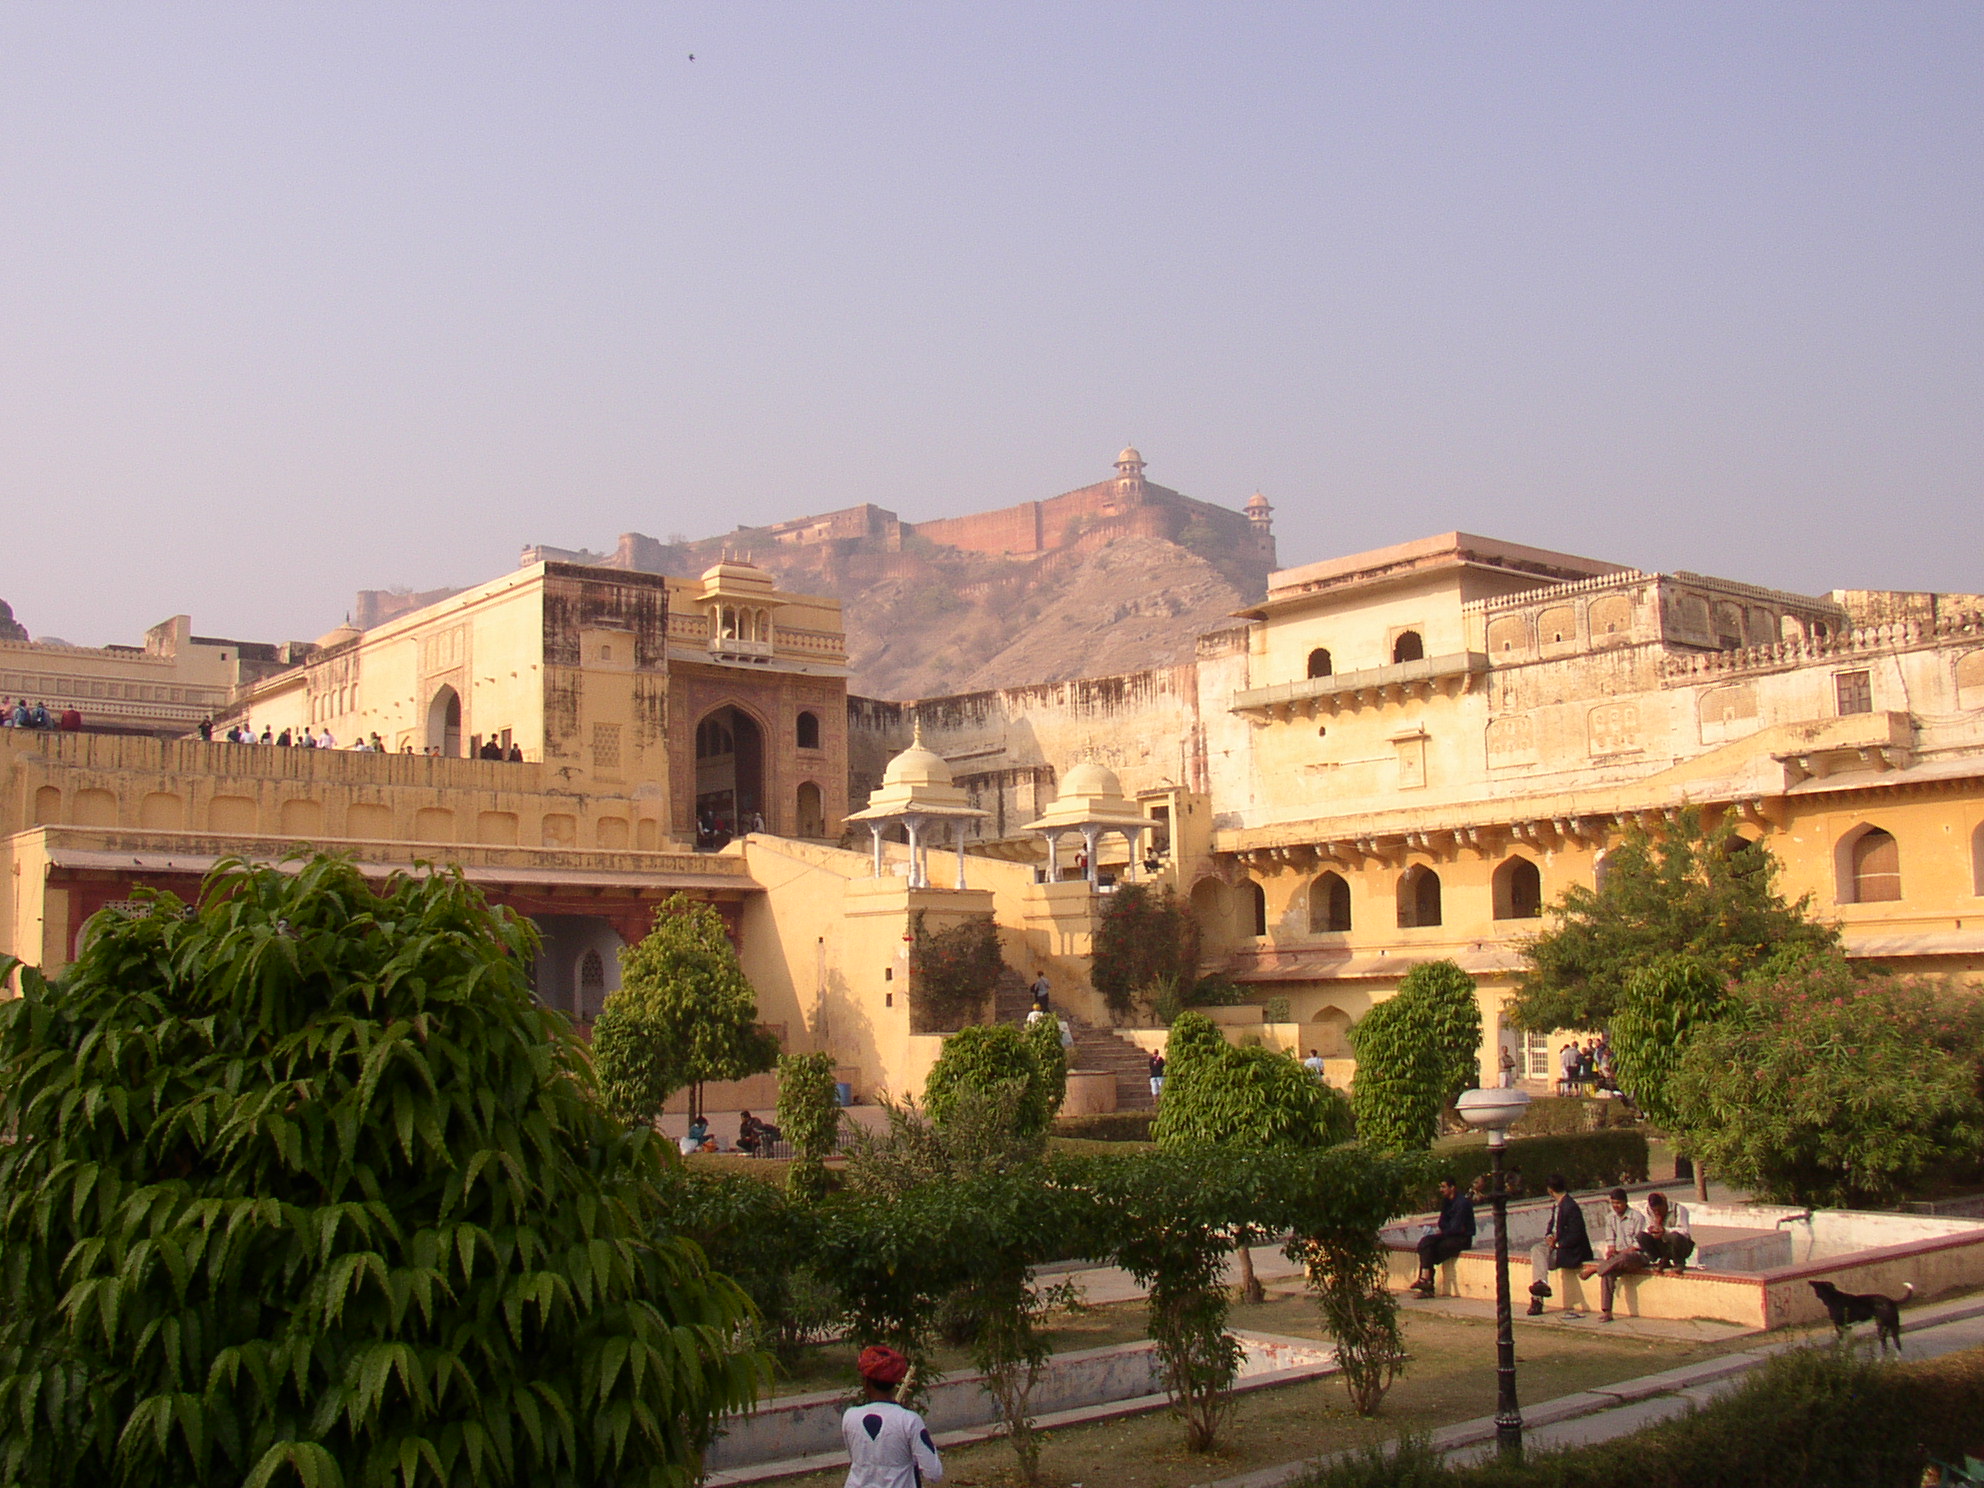 Amber Fort 2C Jaigarh Fort in background